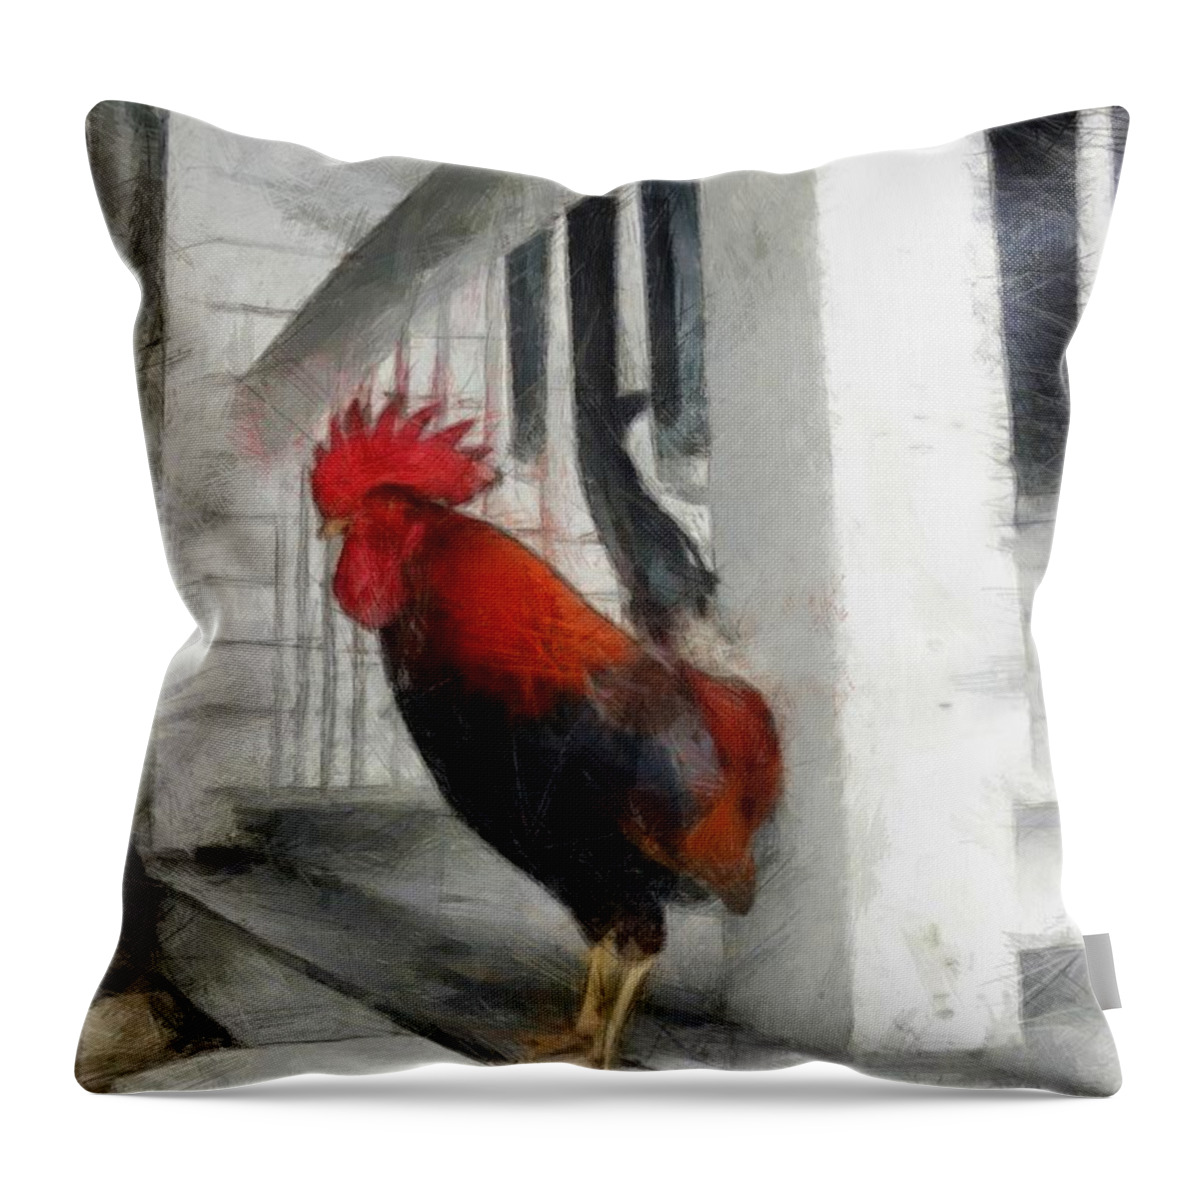 Isolated Throw Pillow featuring the photograph Key West Porch Rooster by Michelle Calkins